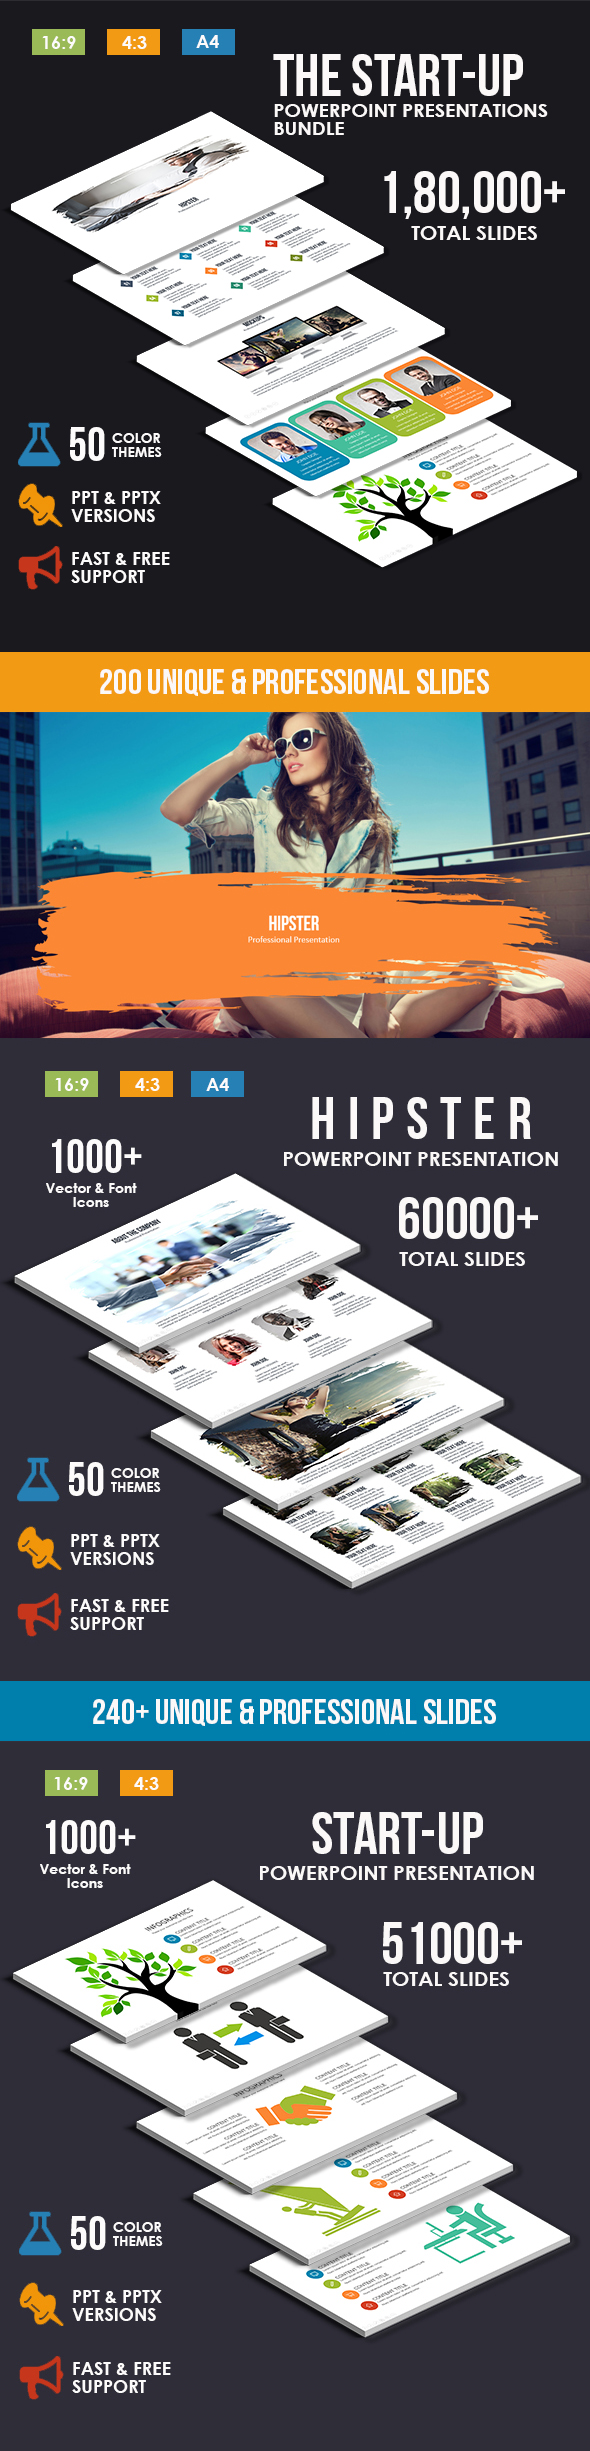 GraphicRiver The Start-up Powerpoint Presentations Bundle 21099299